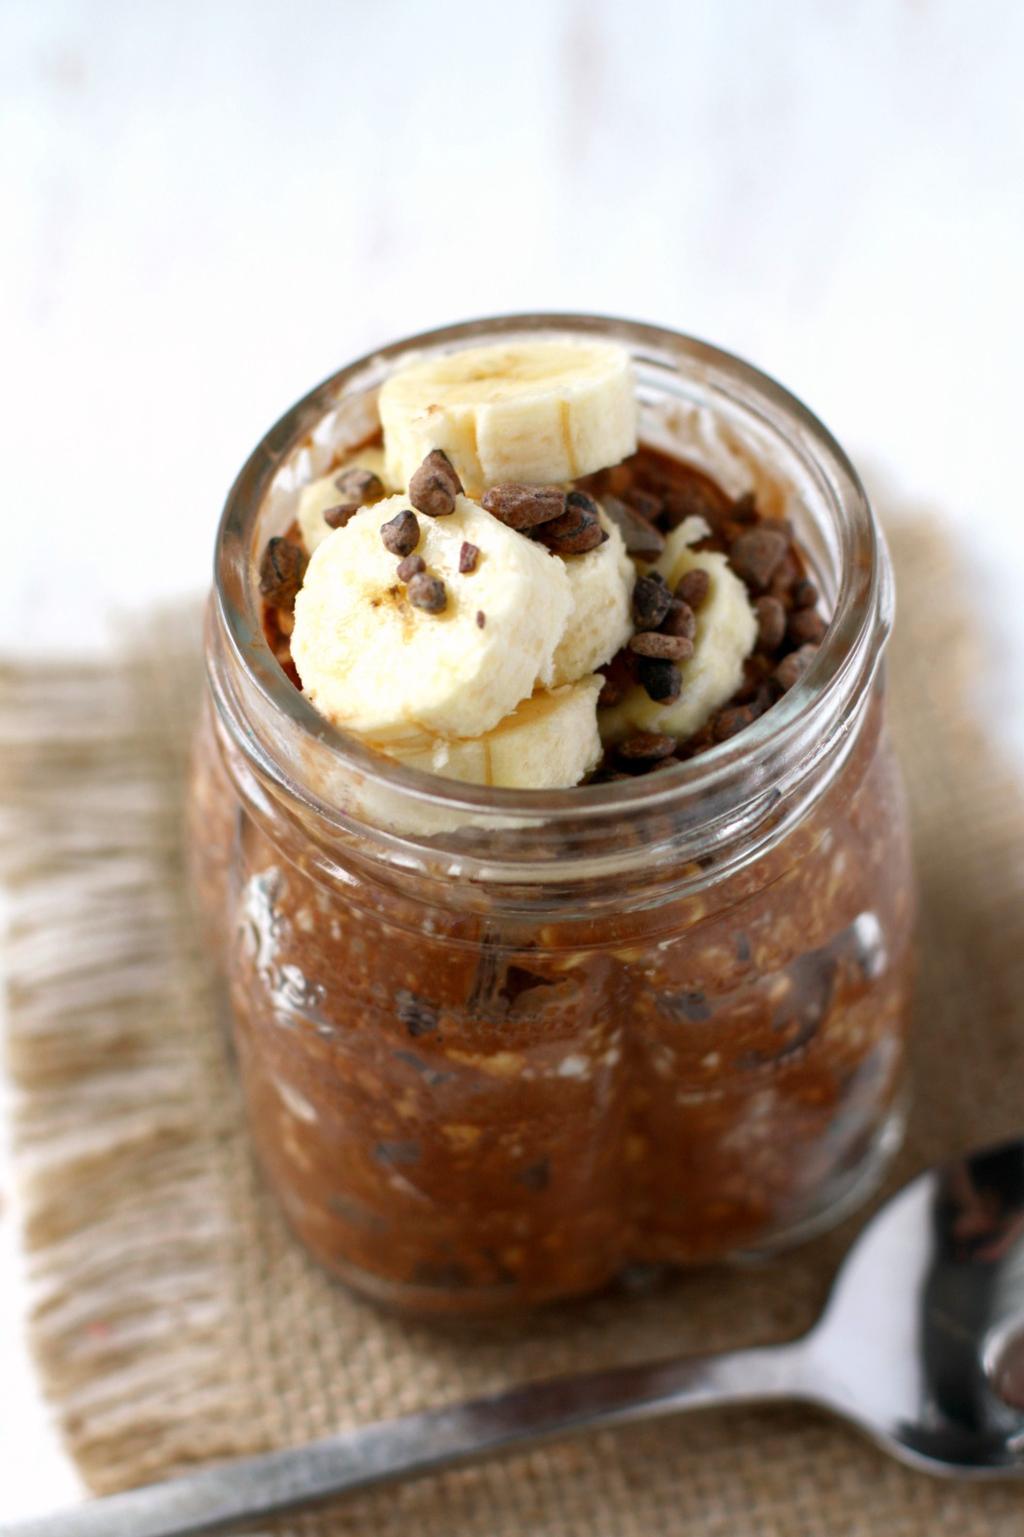 Easy Chocolate Overnight Oats 7/8 cup gluten free oats 2 Tablespoons unsweetened cocoa powder 1 ½ Tablespoons maple syrup ¾ cup dairy free milk (I used coconut milk) ½ of a banana, sliced 1